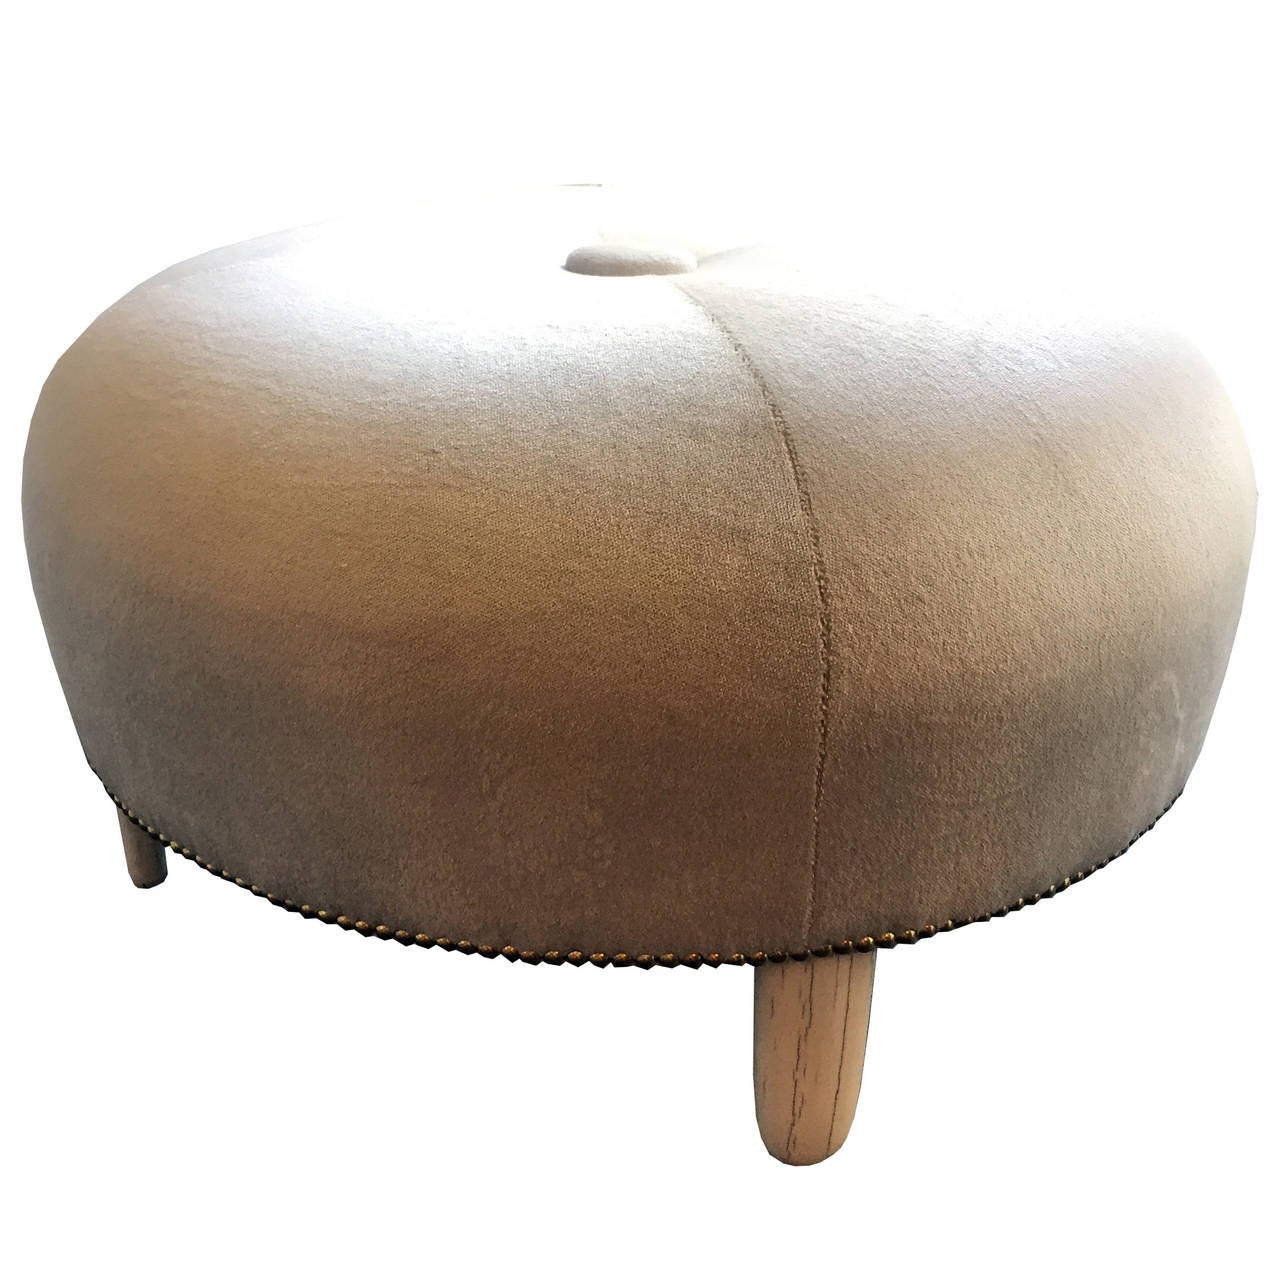 Vintage Ottoman From 1970s At 1stdibs